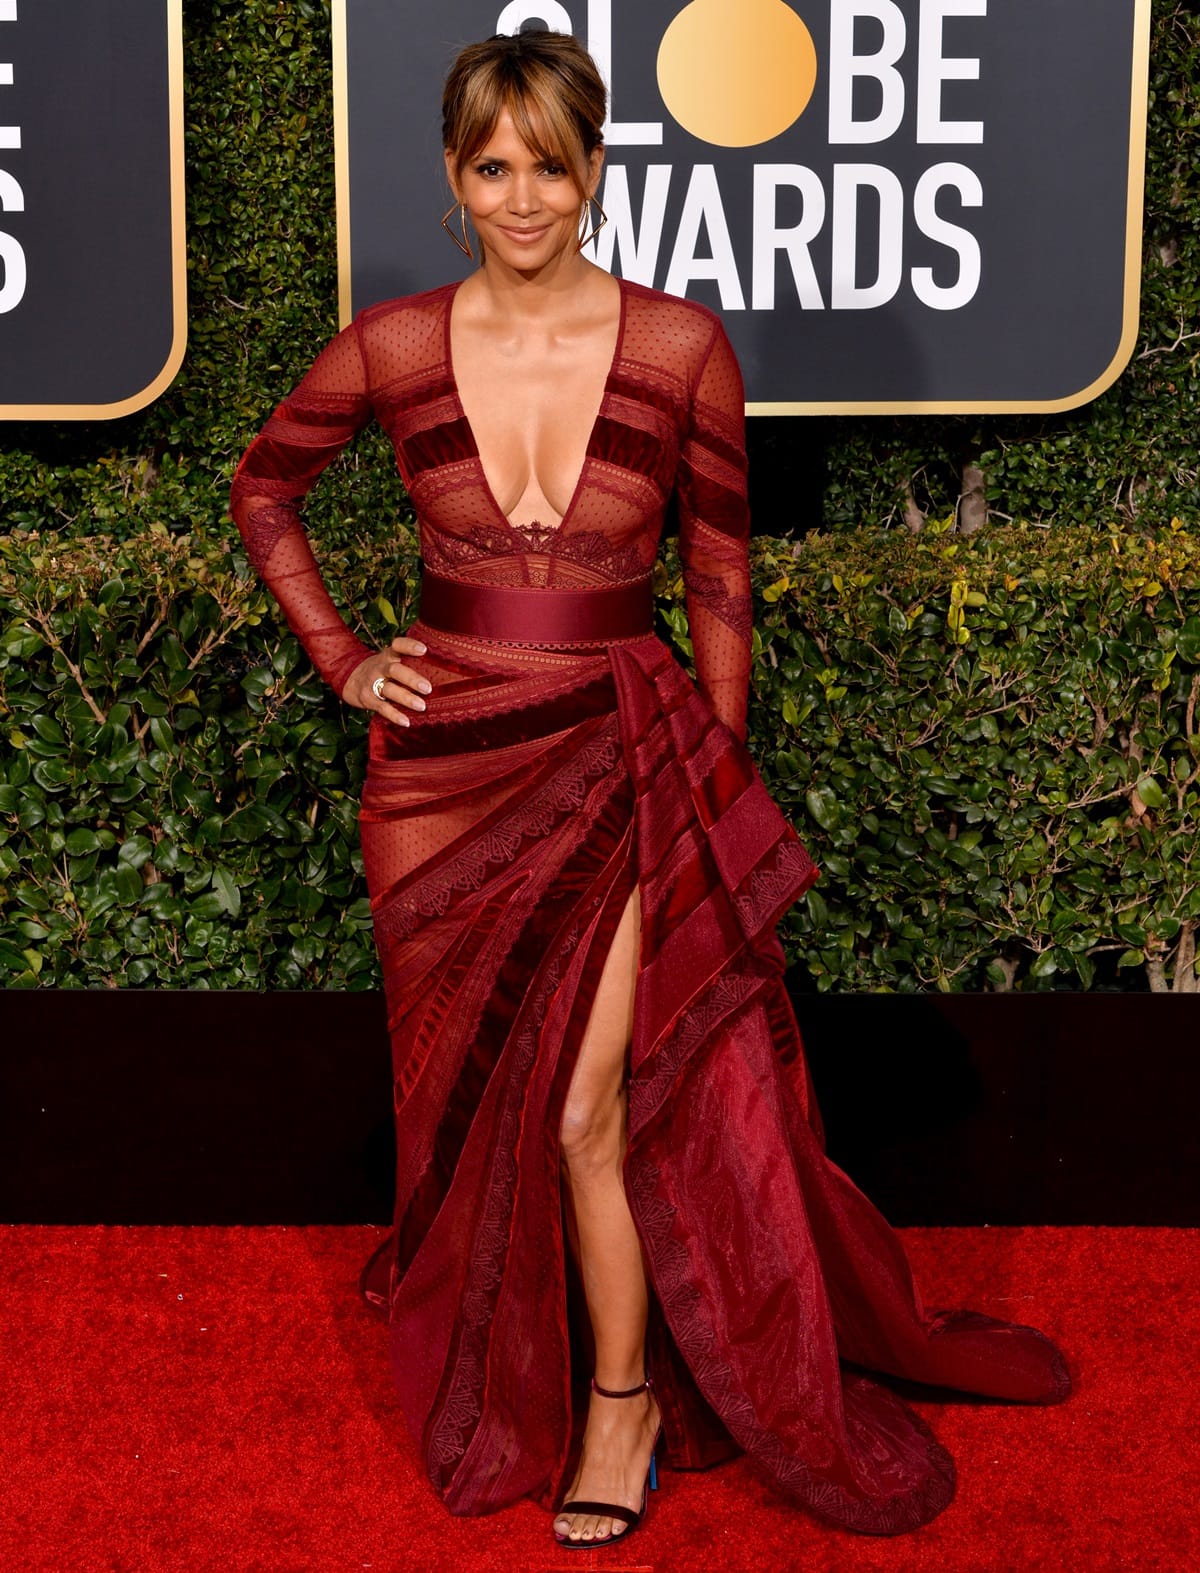 Halle Berry stunned in a burgundy gown by Zuhair Murad that accentuated her figure at the 76th Annual Golden Globe Awards